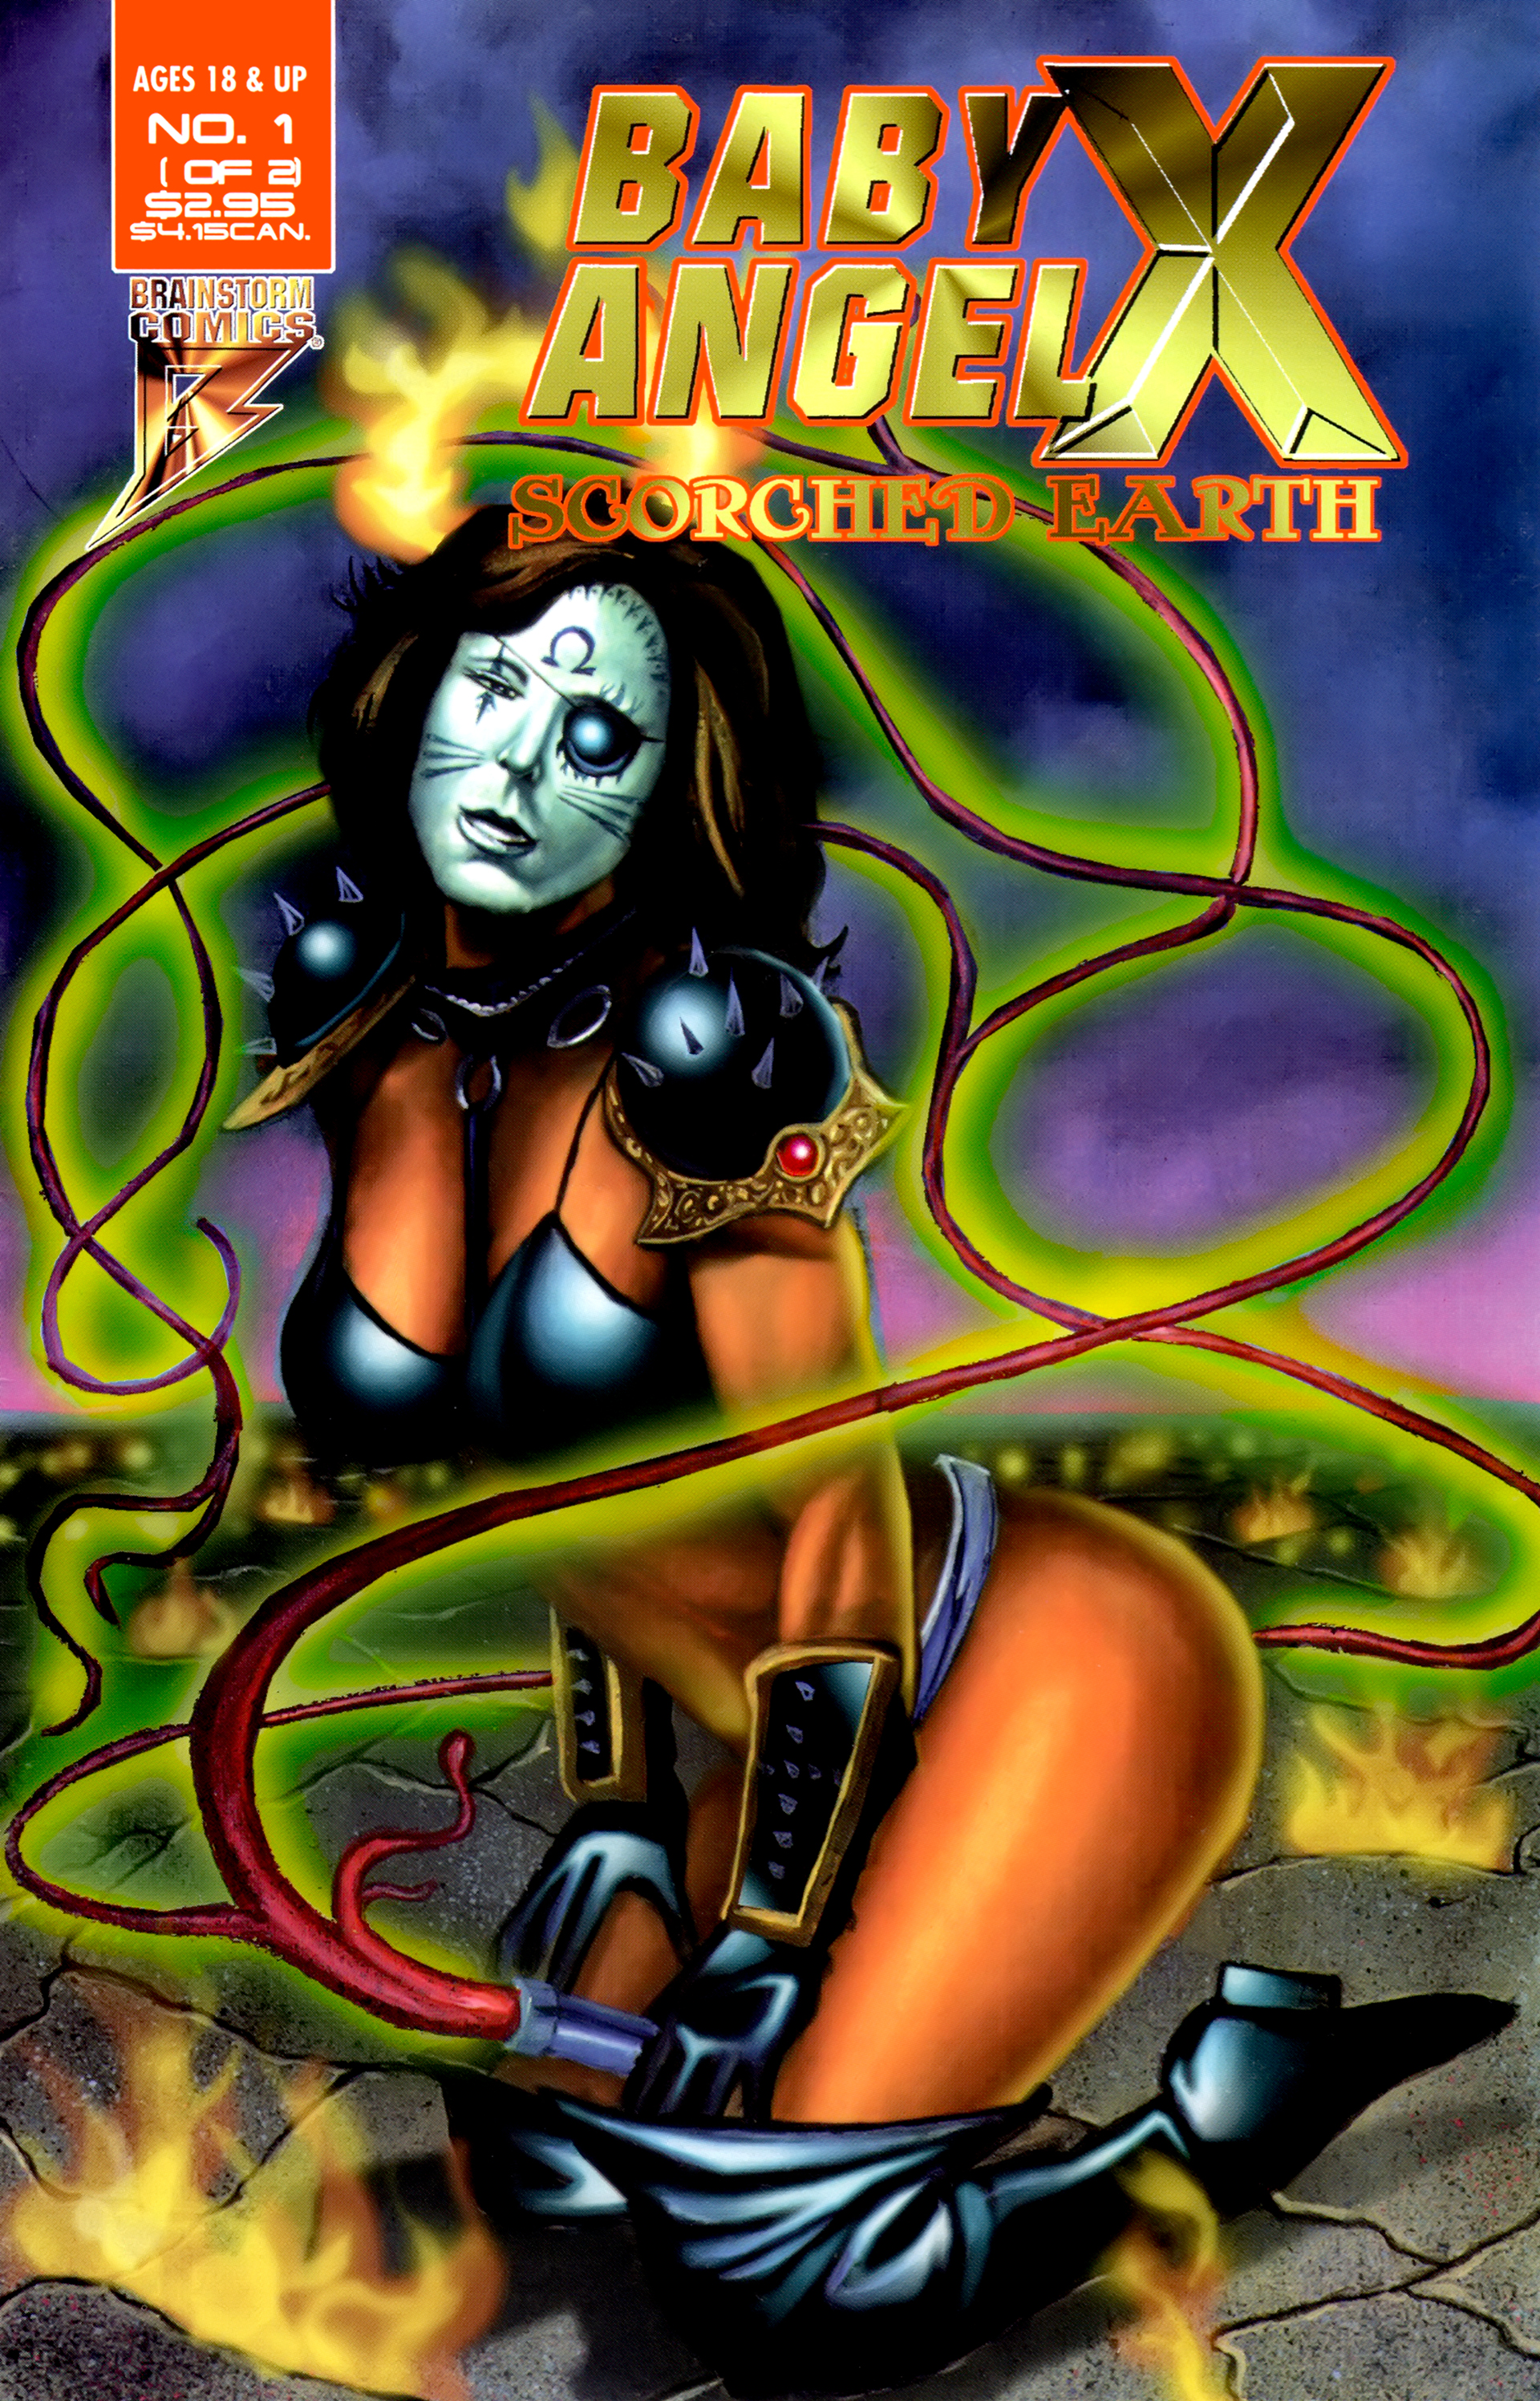 Read online Baby Angel X: Scorched Earth comic -  Issue #1 - 1